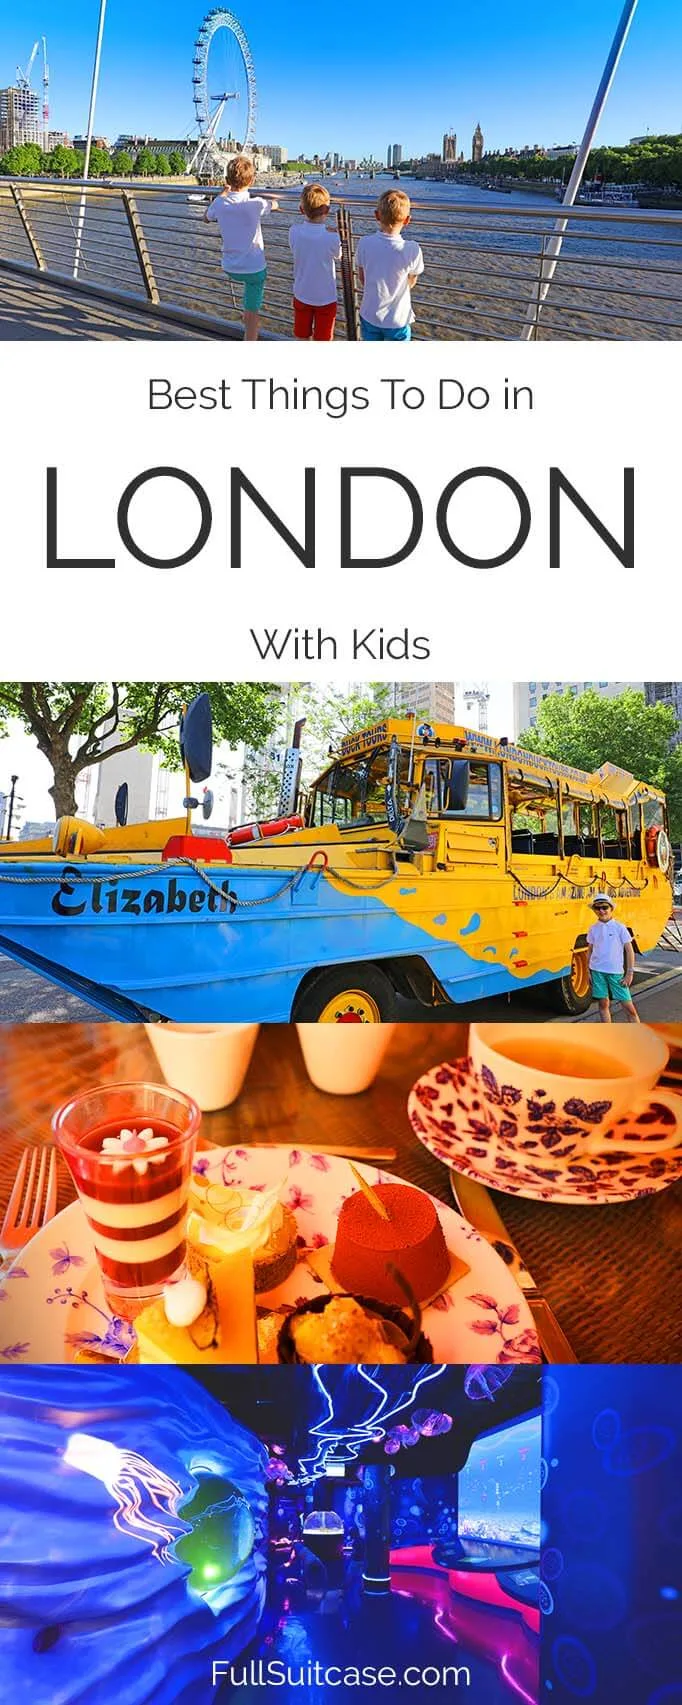 London with kids - what to do and see if visiting London with the family for the first time